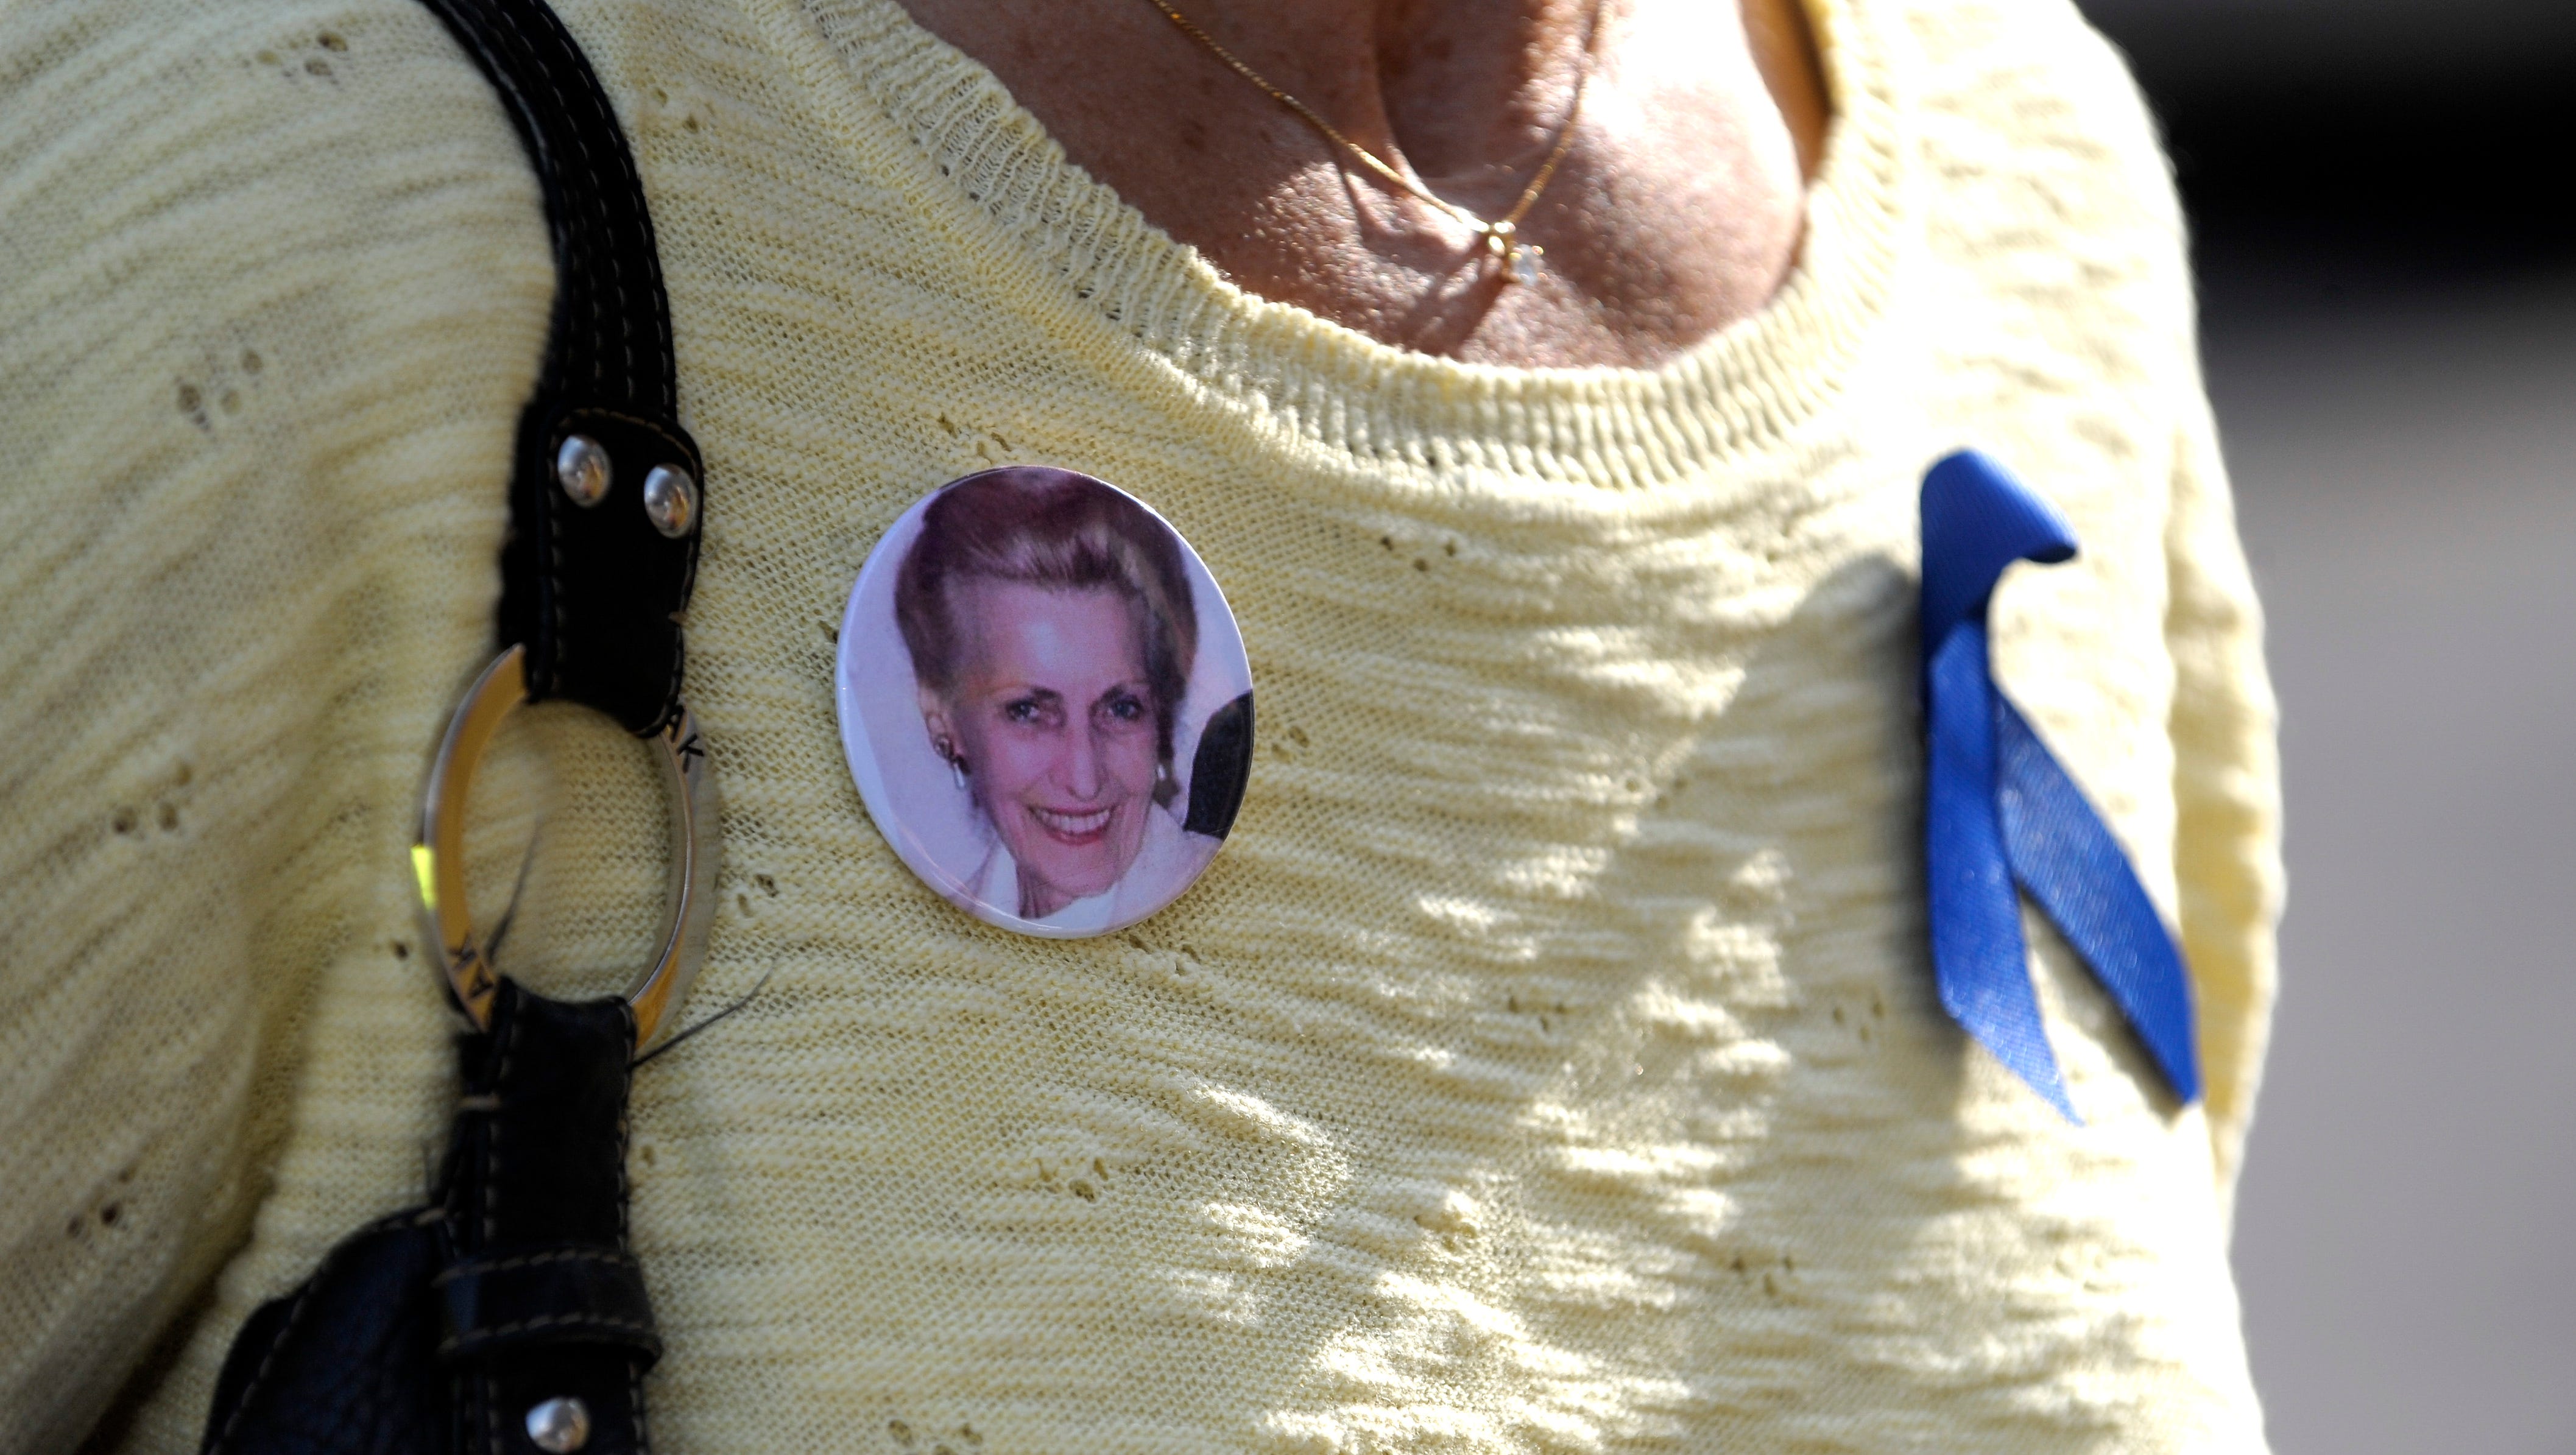 Sydney Zaremba, 60, of Lake Orion, wears a button of her mother, Helene Zaremba, who died 3 months after beginning treatment for lymphoma by Dr. Fata.